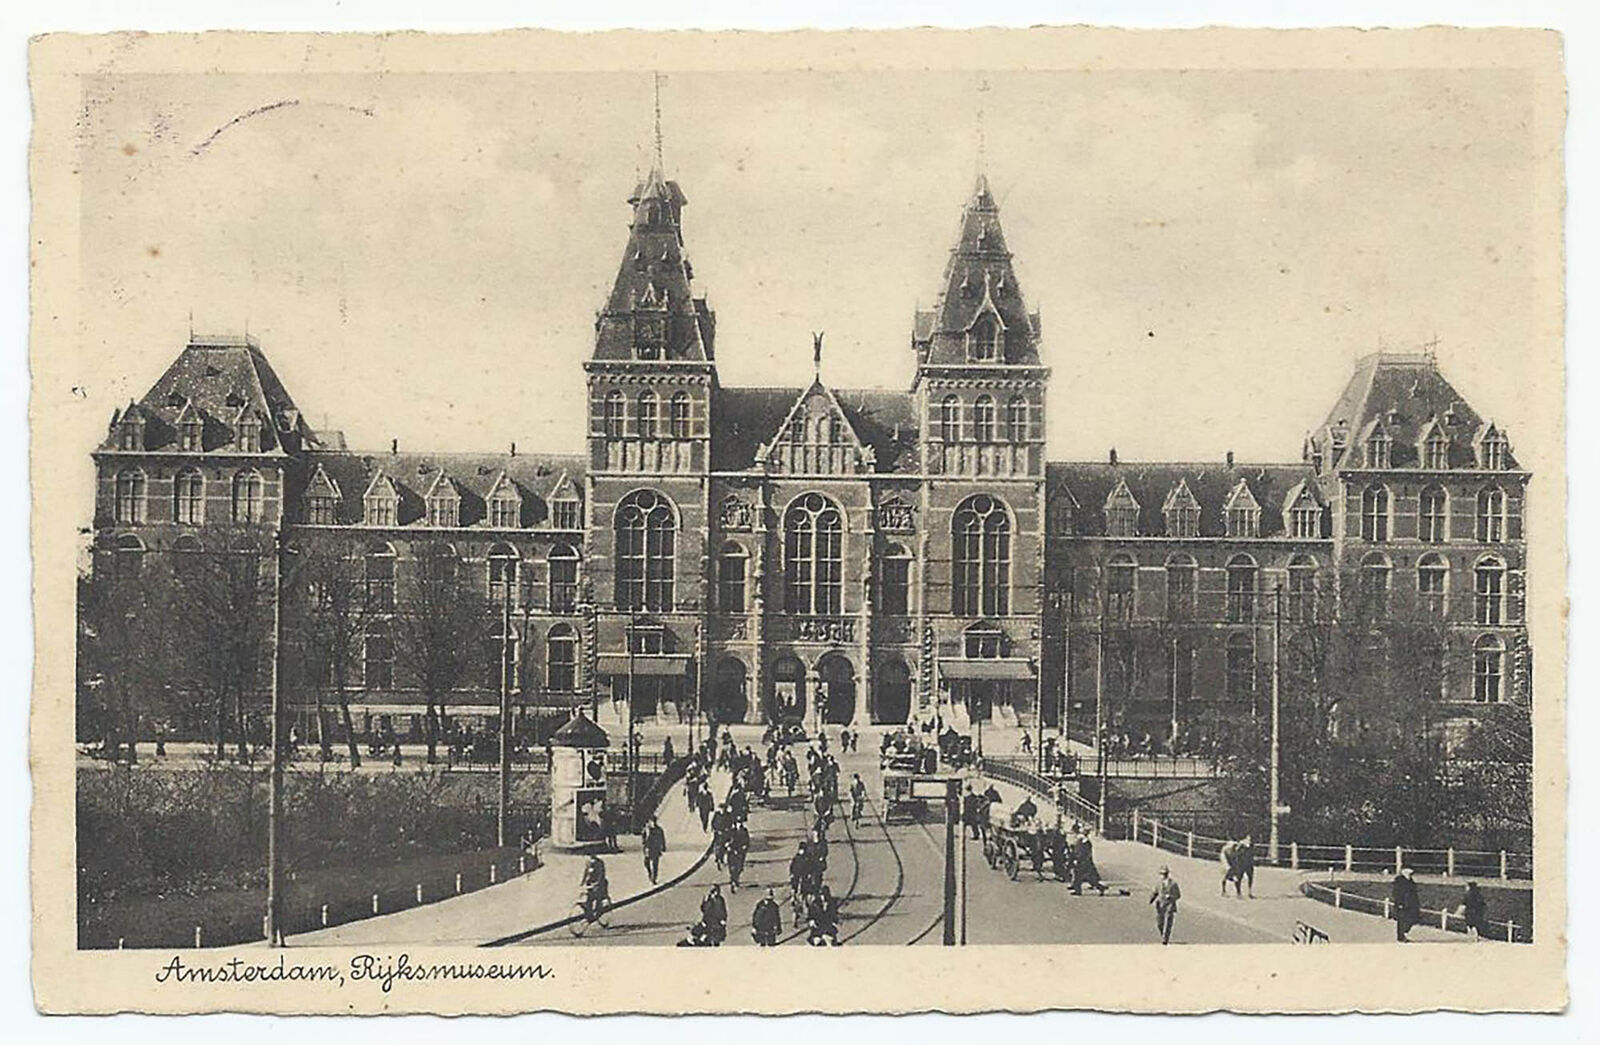 Amsterdam Netherlands, Old PC, View of Rijksmuseum, No. 3620, 1938